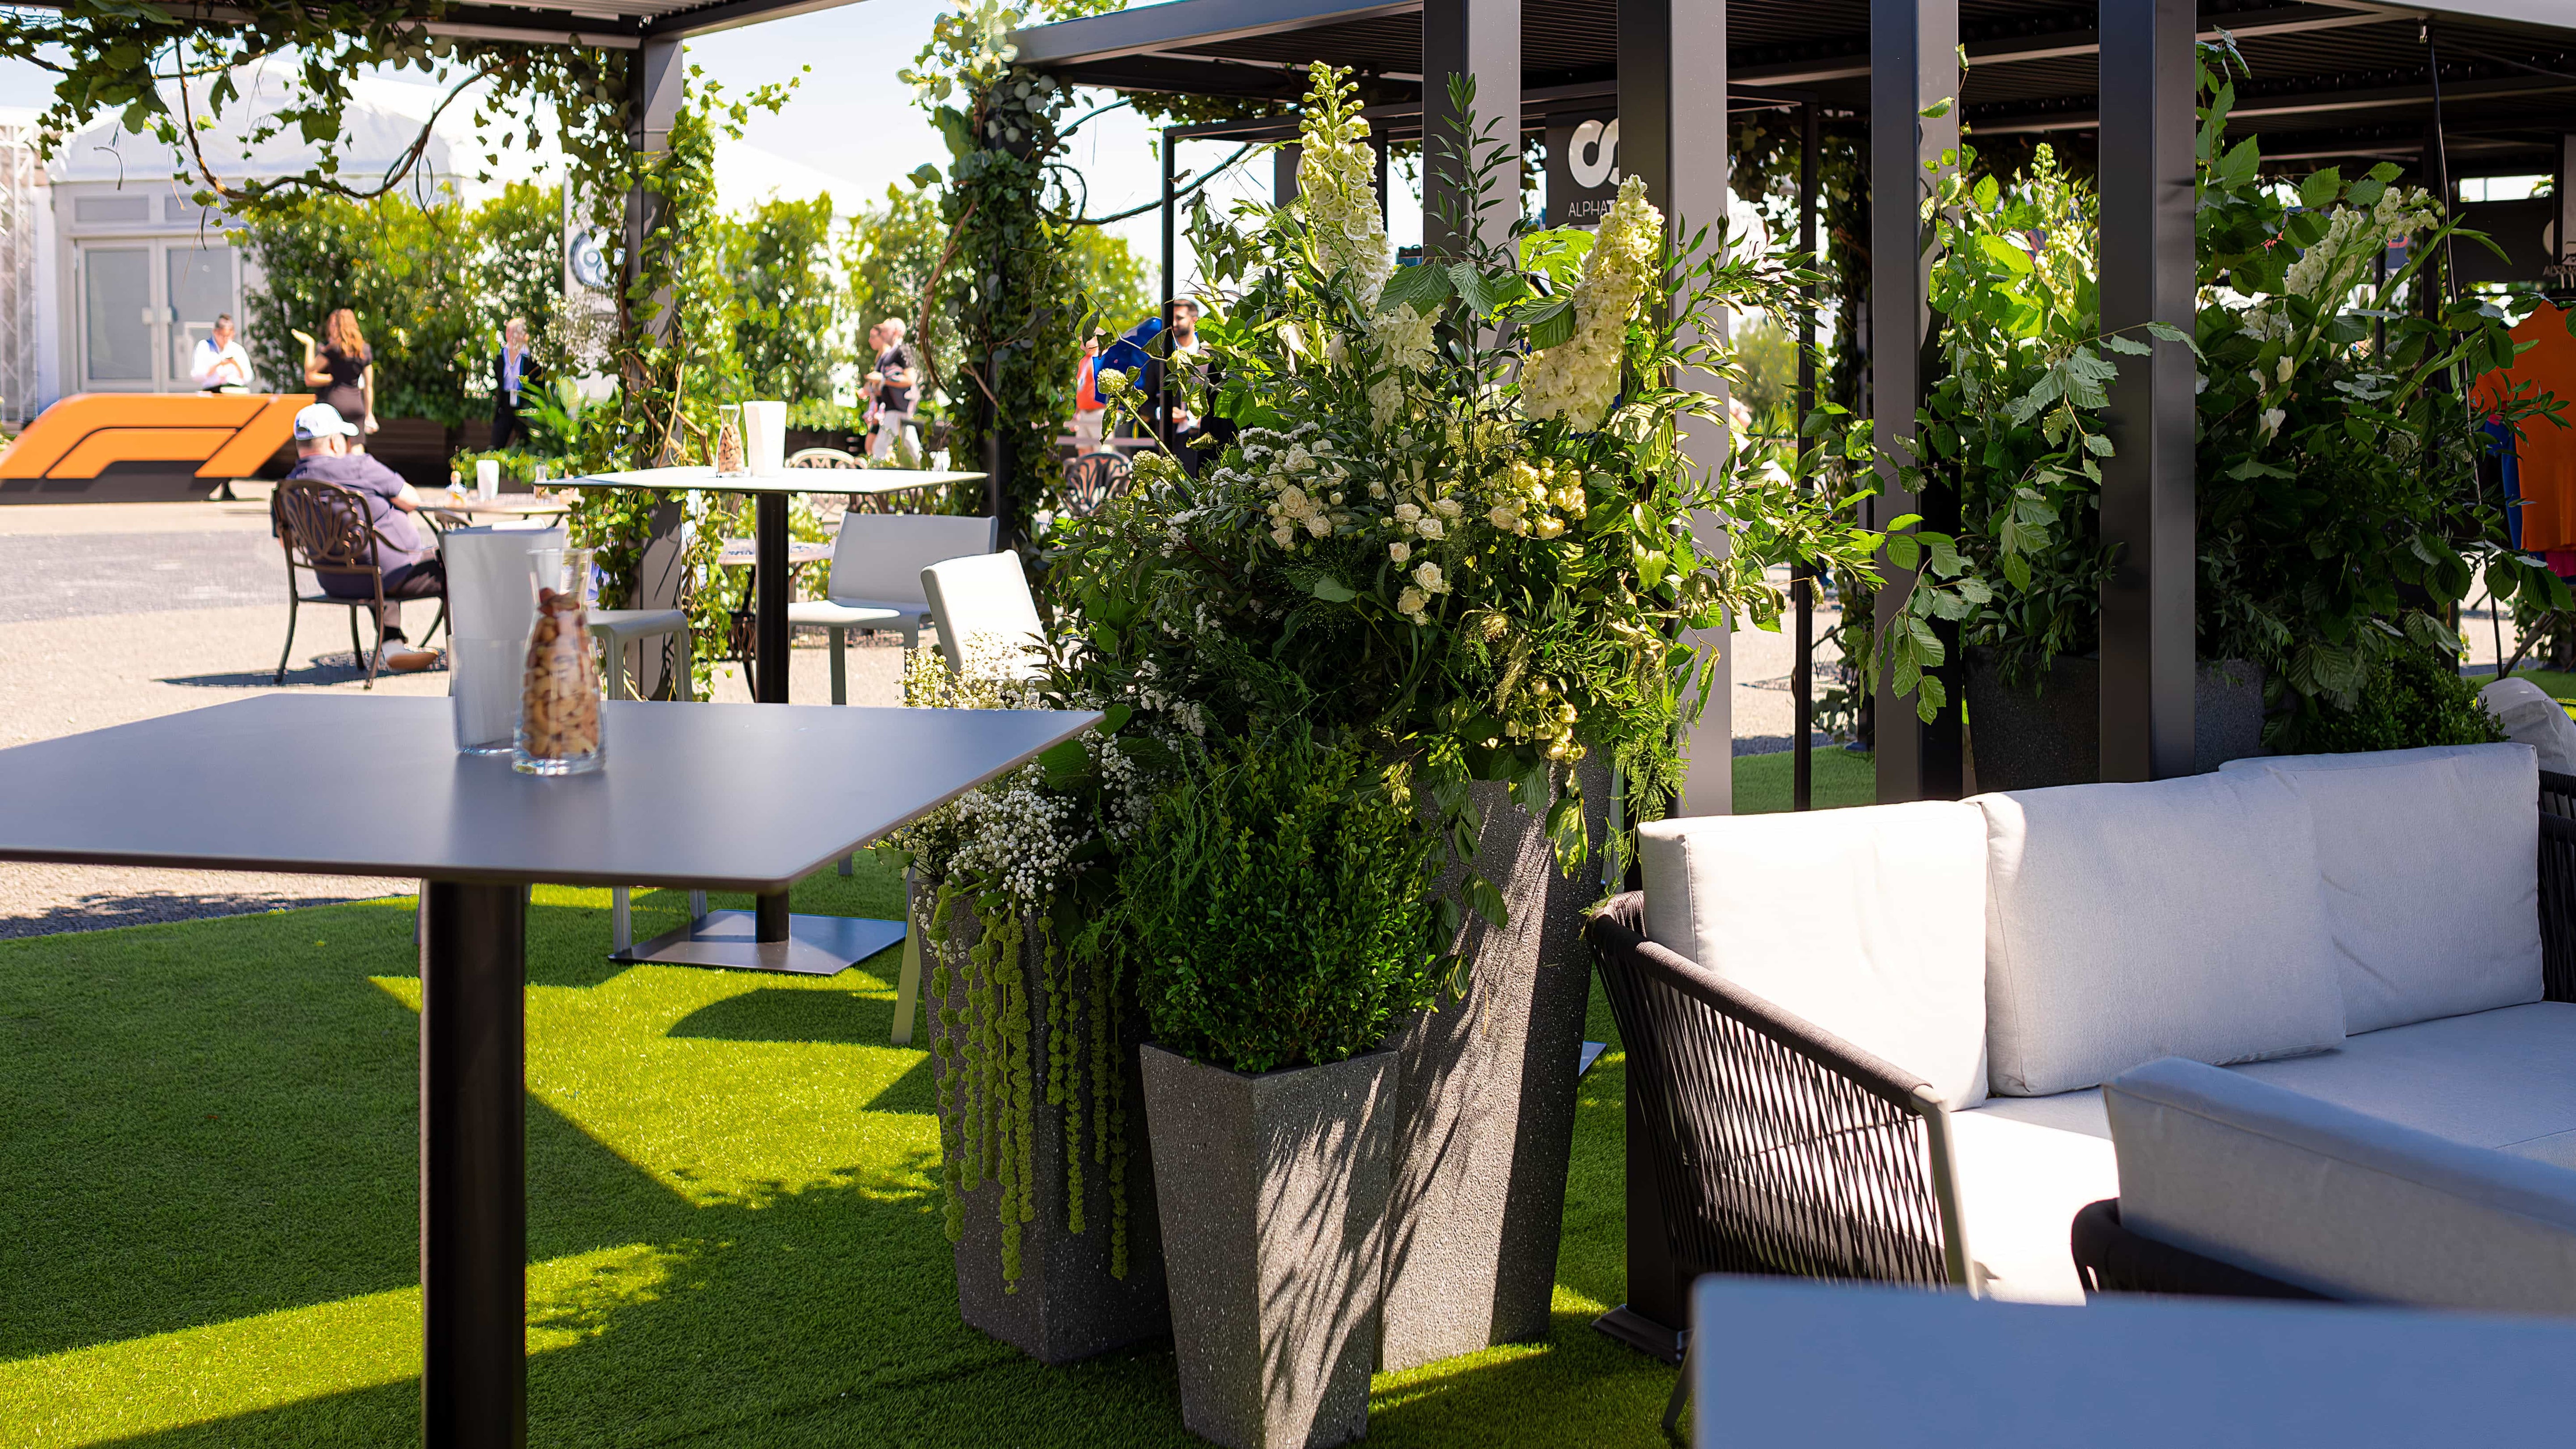 Bespoke plant installations by event florist Amaranté London, enhancing the natural beauty at Formula 1's Silverstone event.